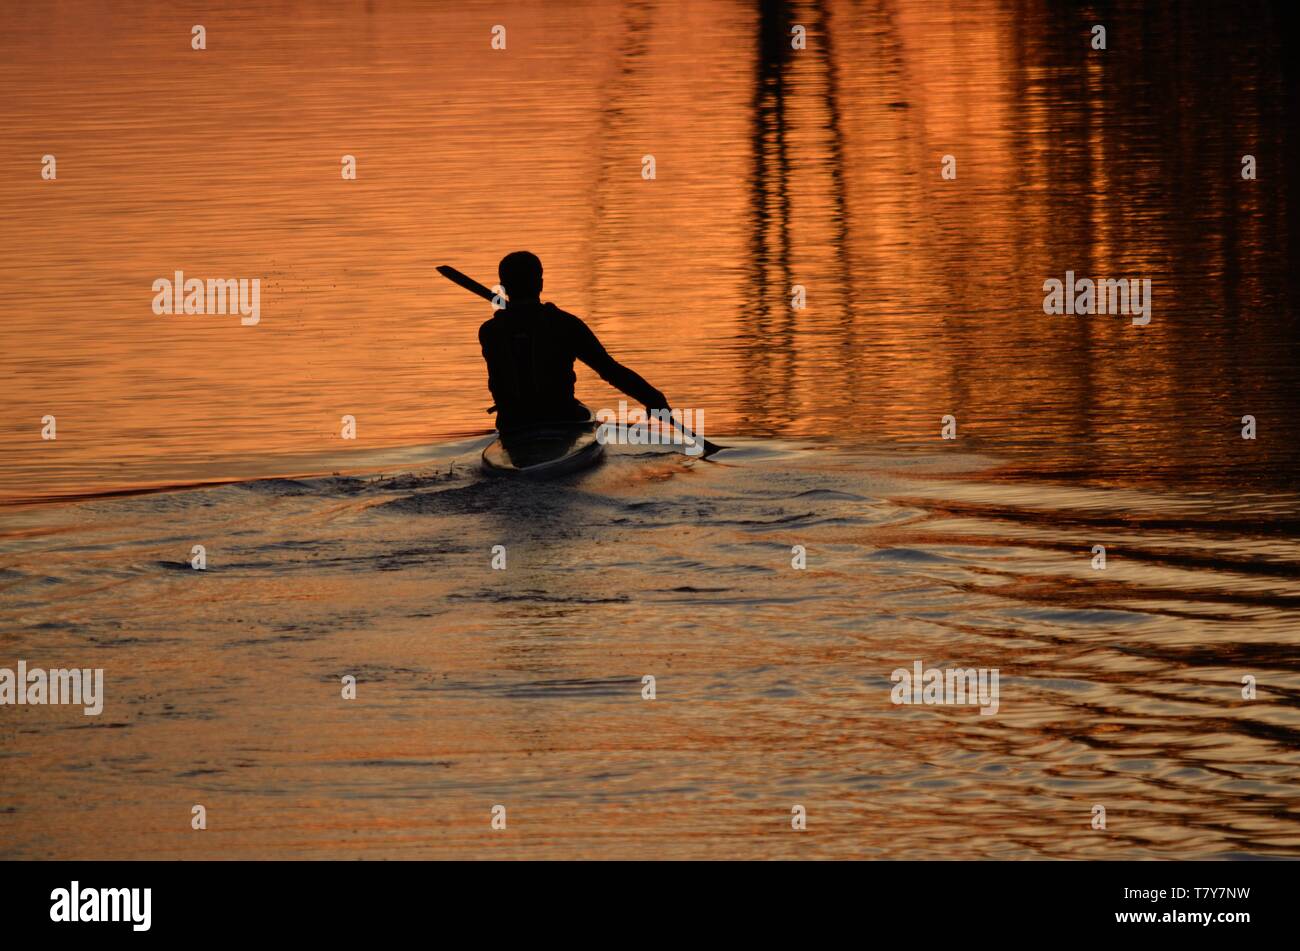 Silhouette of a canoeist paddling into sunset reflection on River Avon Stock Photo